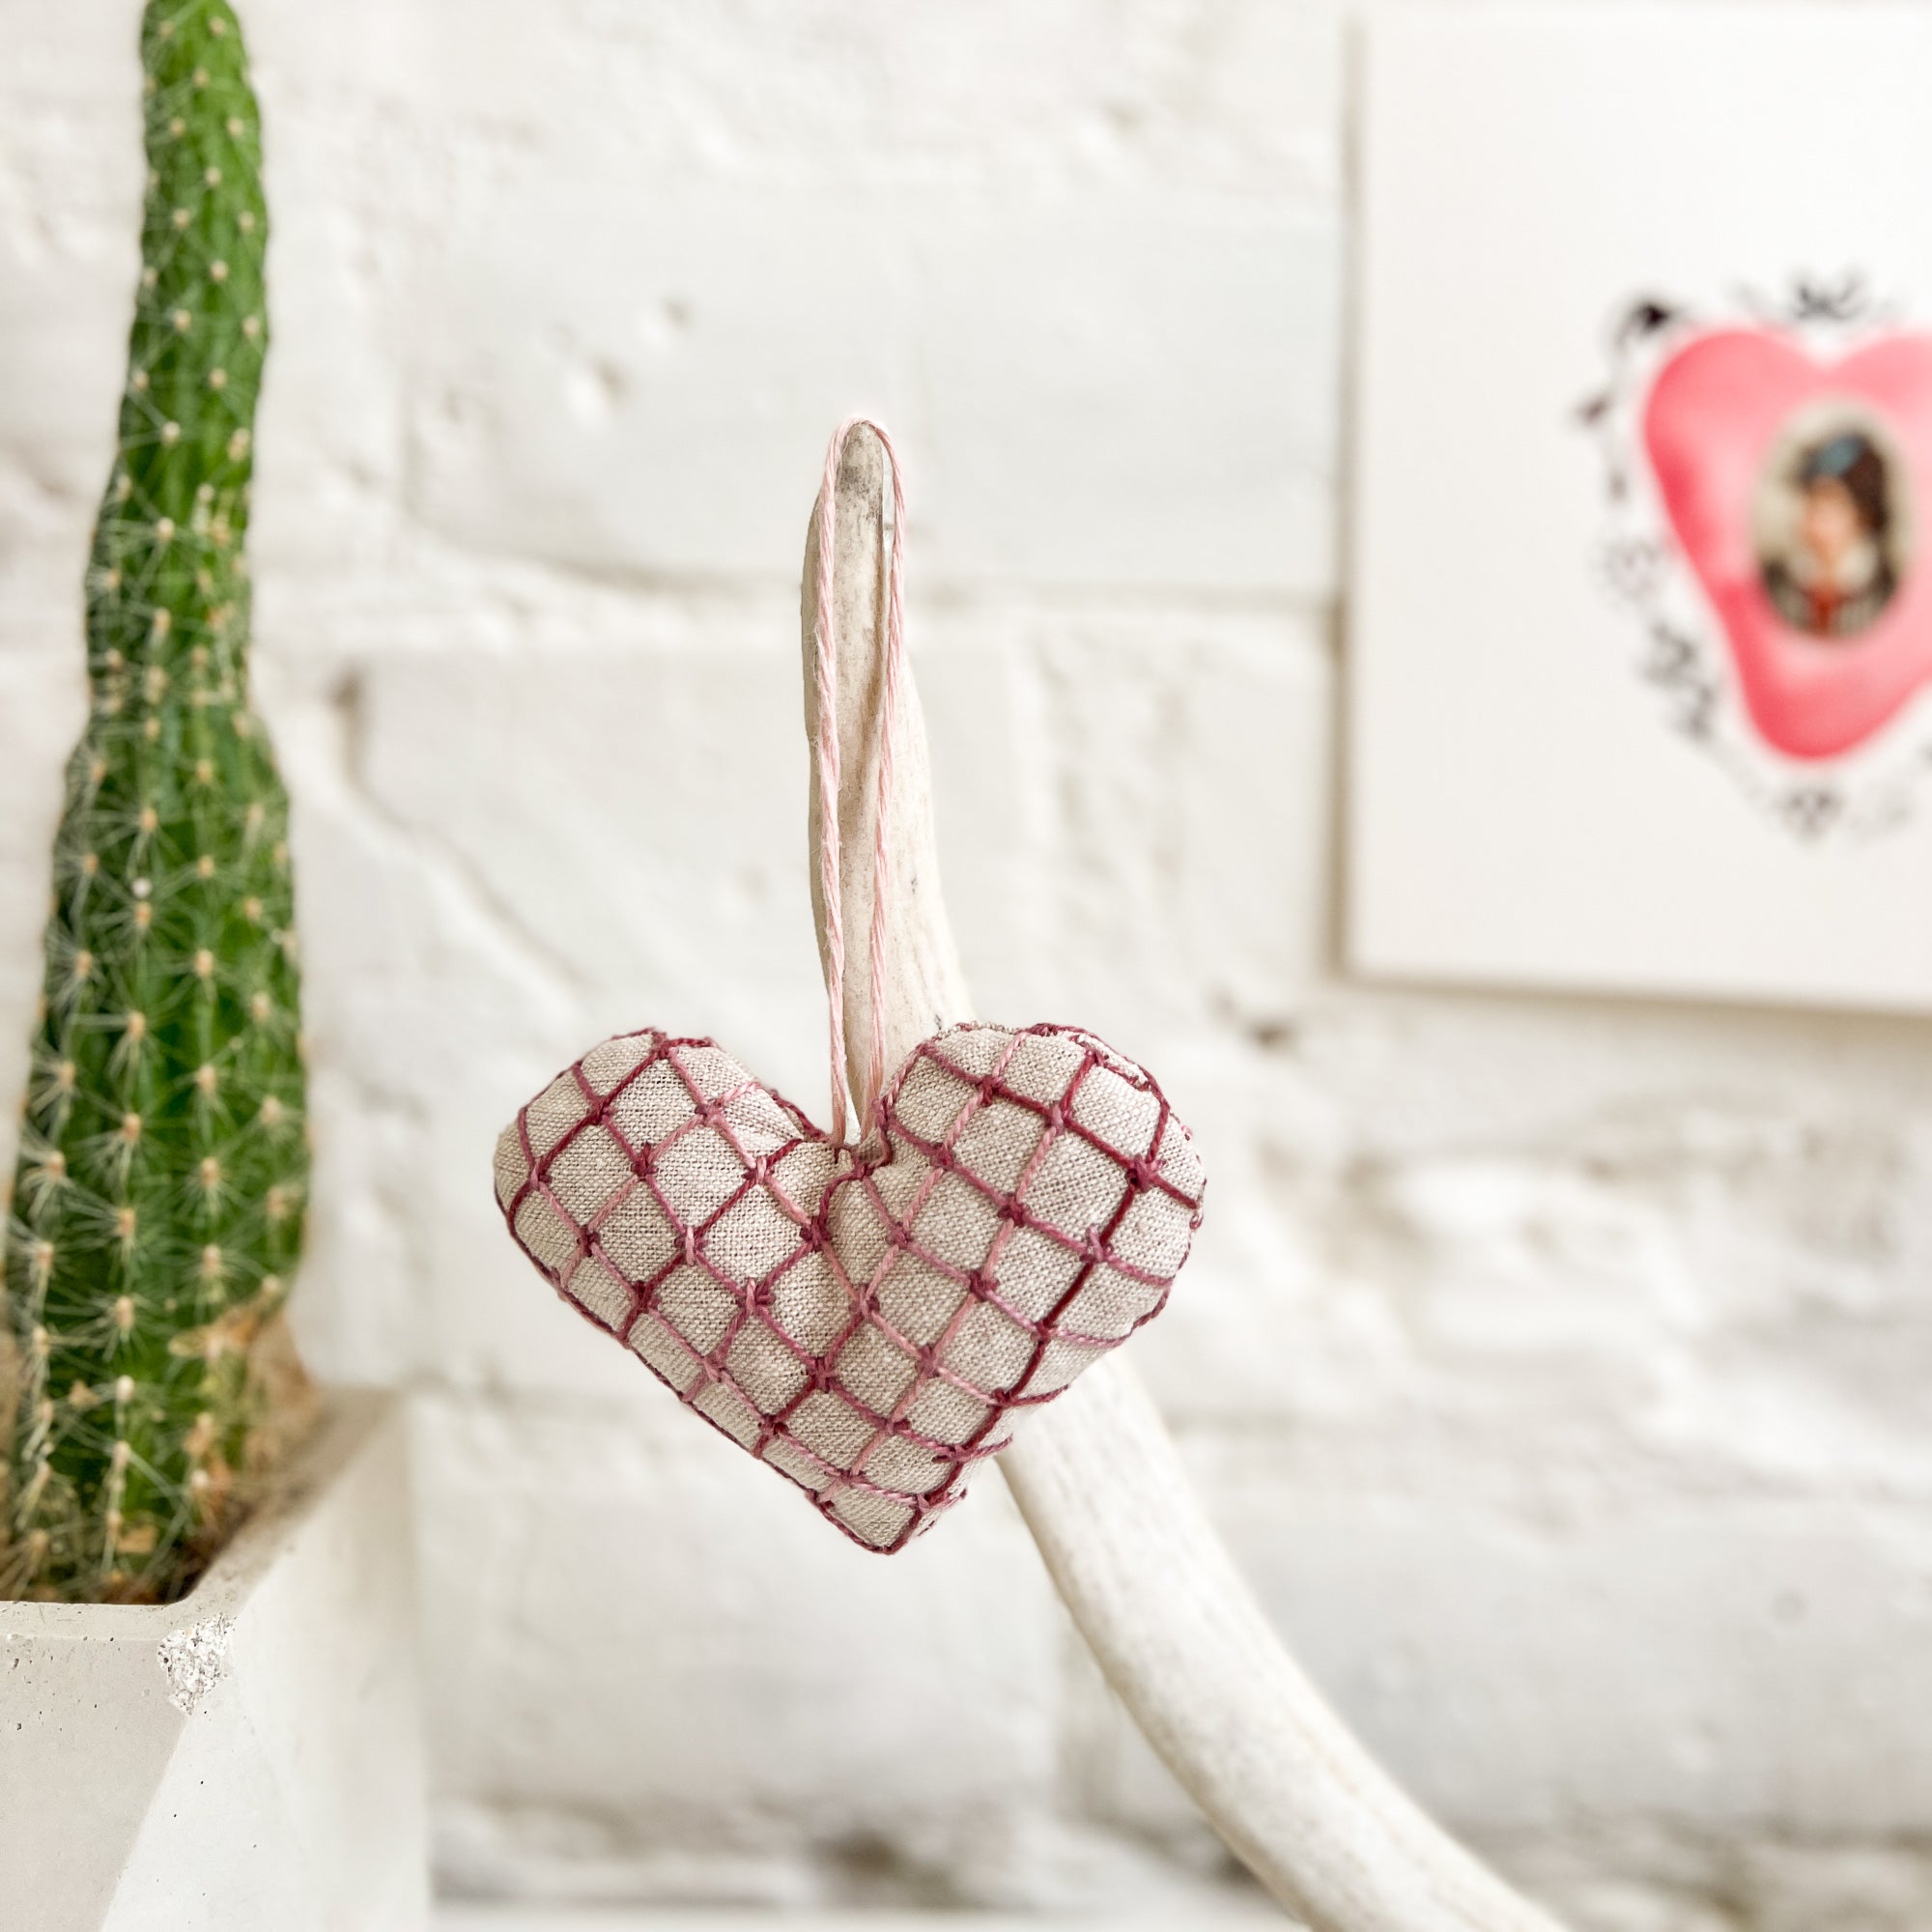 Jane Embroidered Hearts Kit